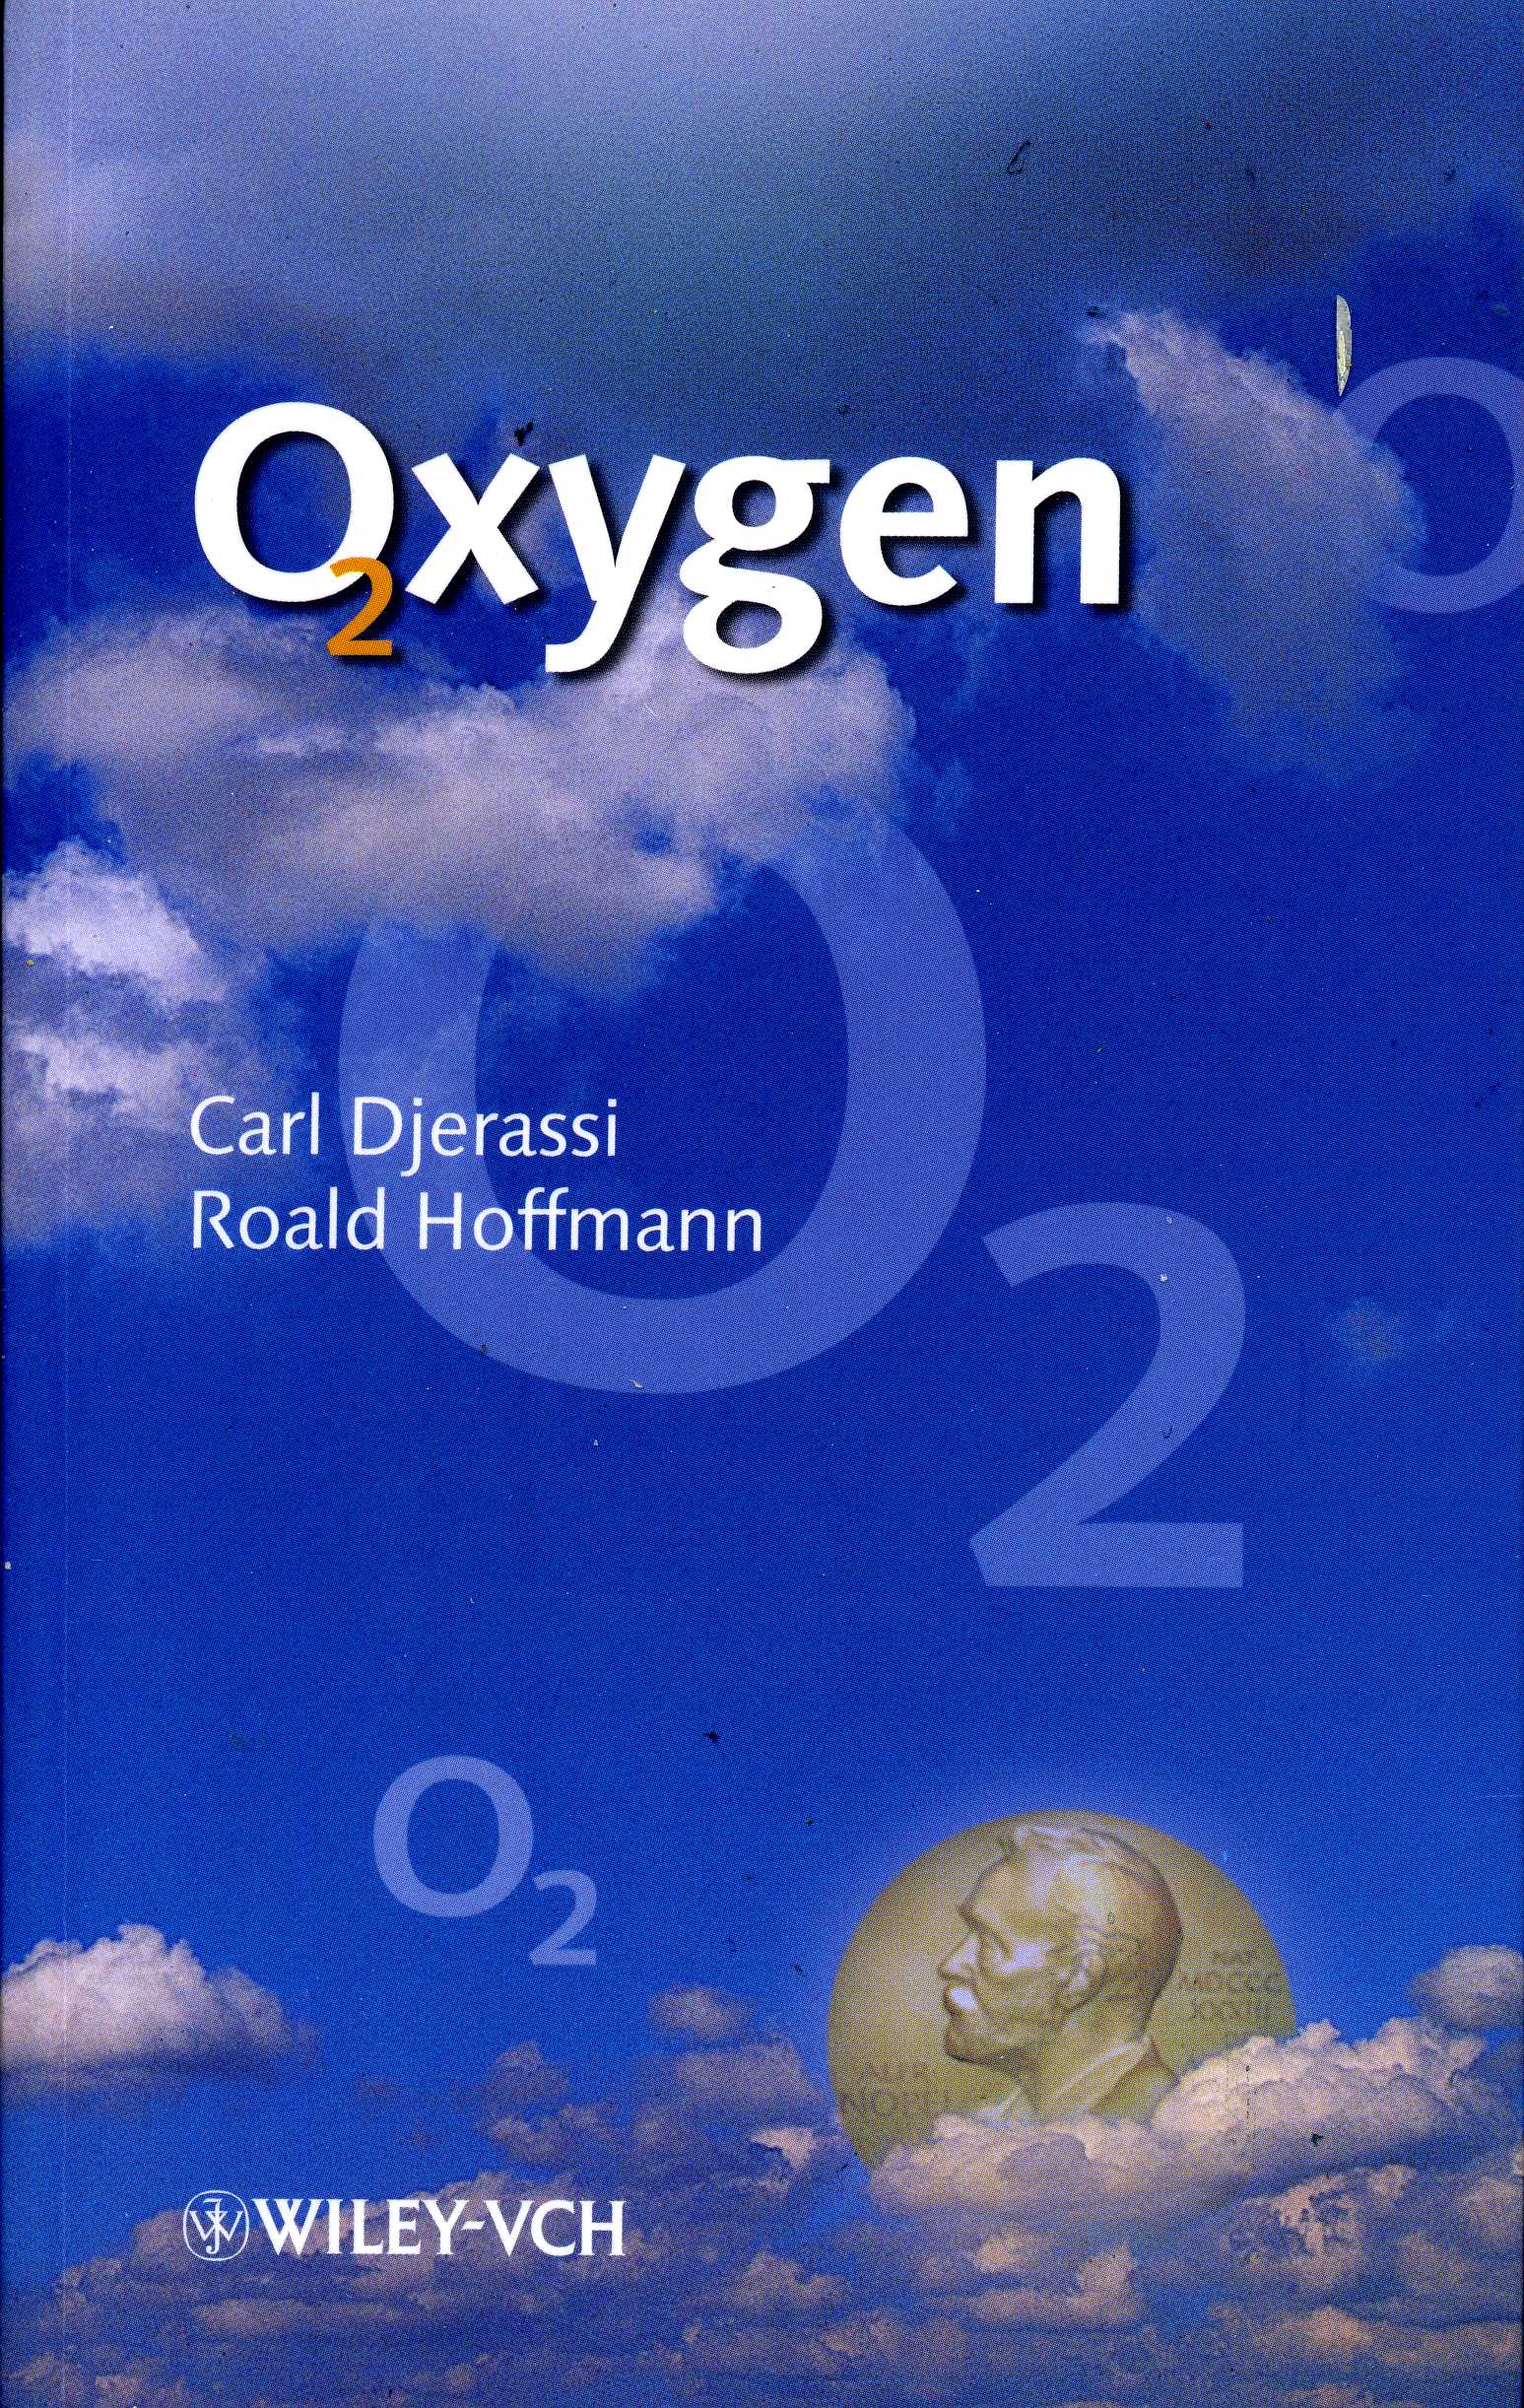 A play by Carl Djerassi and Roald Hoffmann. Published by VCH in 2001, with numerous translations in other languages.